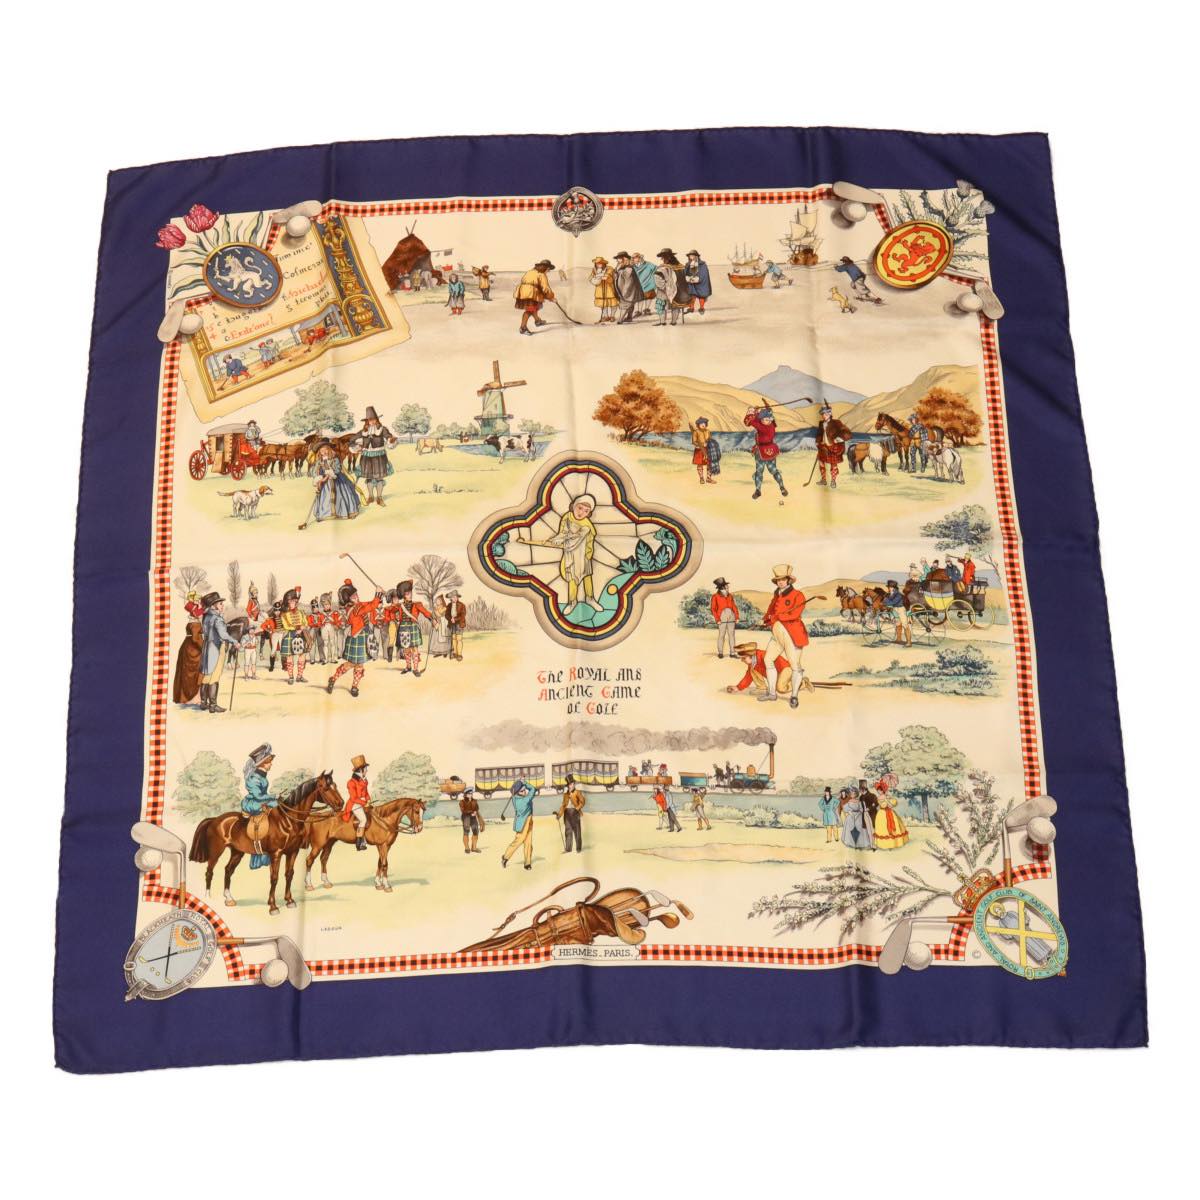 HERMES Carre 90 Scarf ""The ROYAL ANS ANCIENT GAME Of GOLF"" Silk Blue am2543g